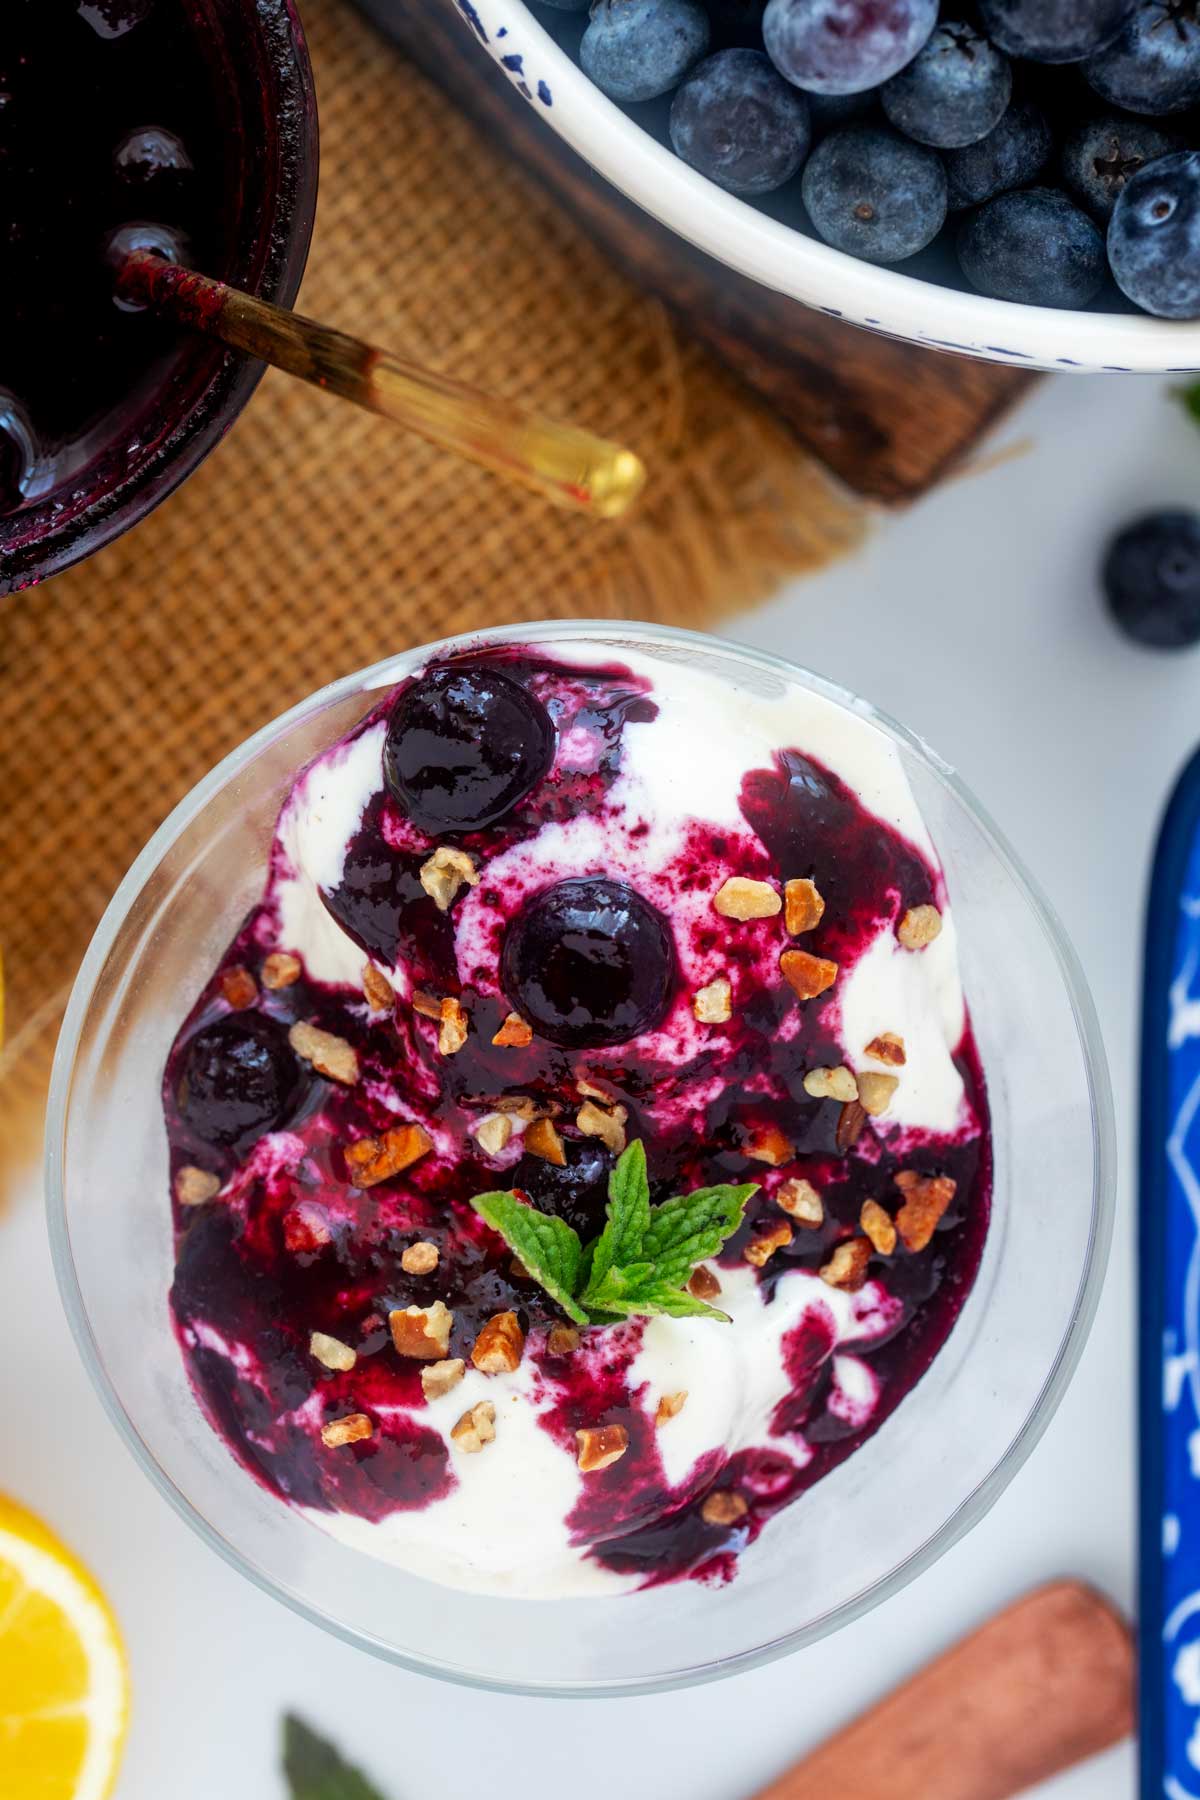 Overhead photo of an ice cream dish with NInja Creami Protein Ice cream topped with blueberry compote.